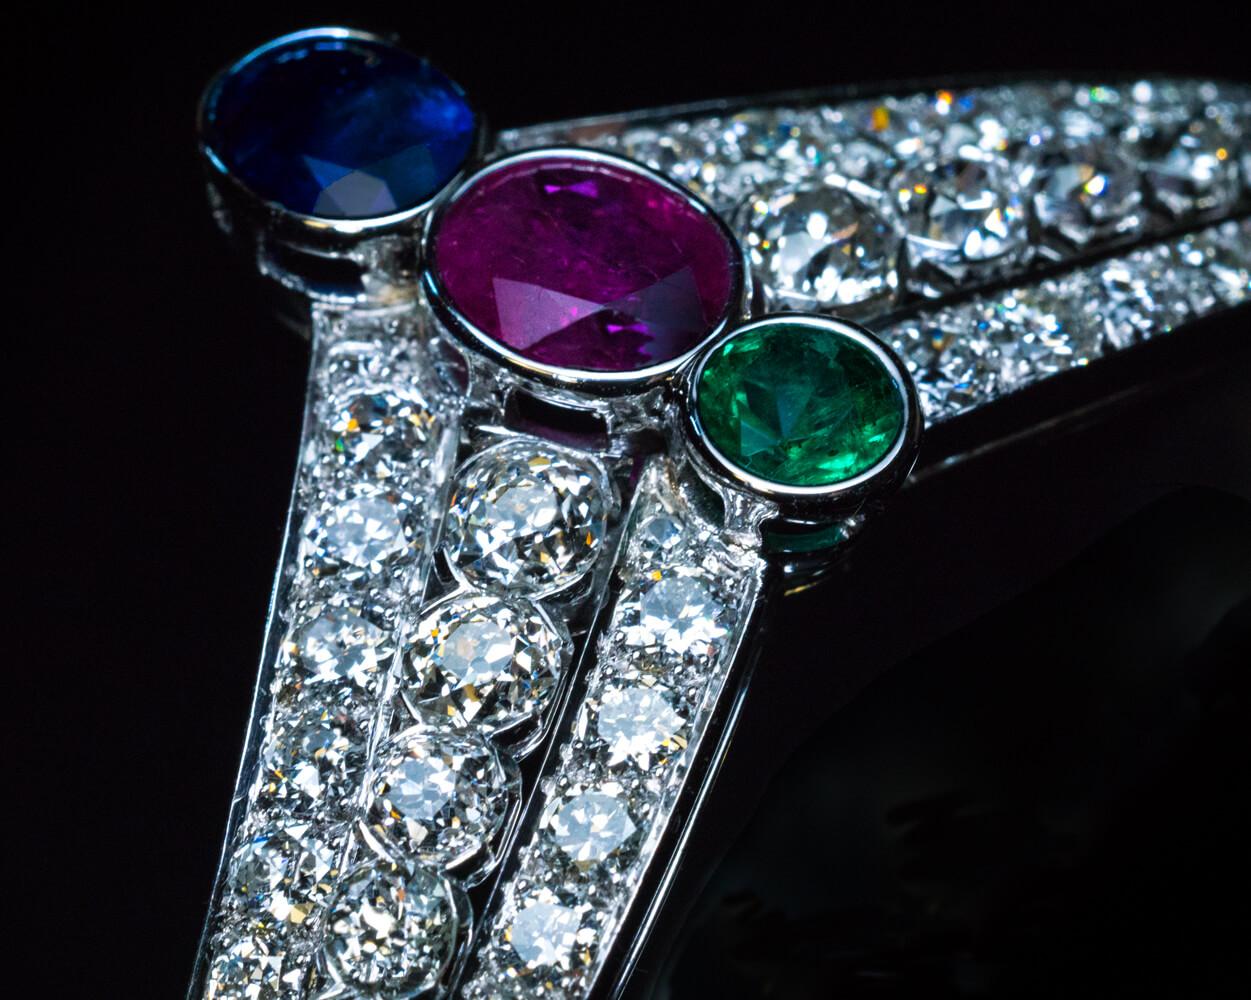 This unique, one of a kind tiara-shaped Art Deco bracelet is finely modeled in 14K white gold. The bracelet is vertically set to the center with a sapphire, a ruby, and an emerald (approximately 1.52 ct, 1.47 ct, 0.48 ct). The colored stones are